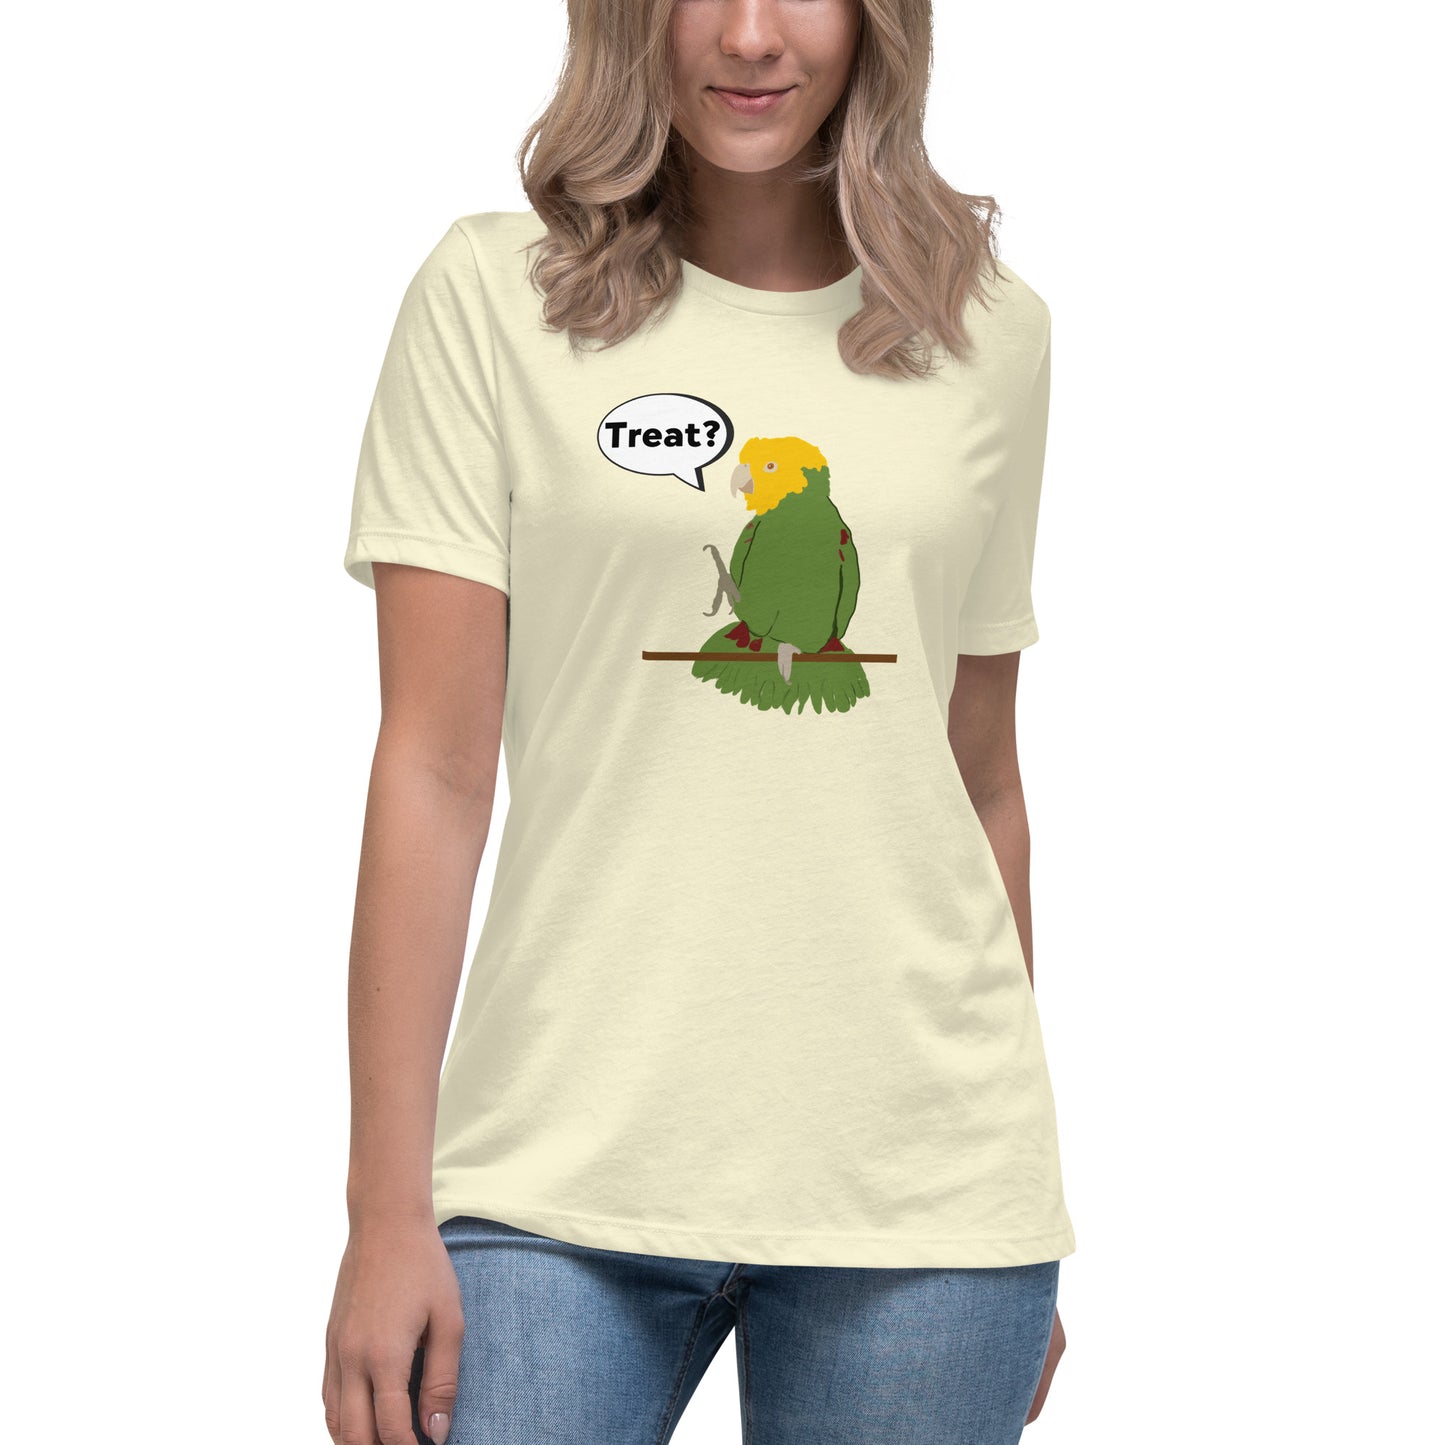 Chico Wants a Treat! Women's Relaxed T-Shirt